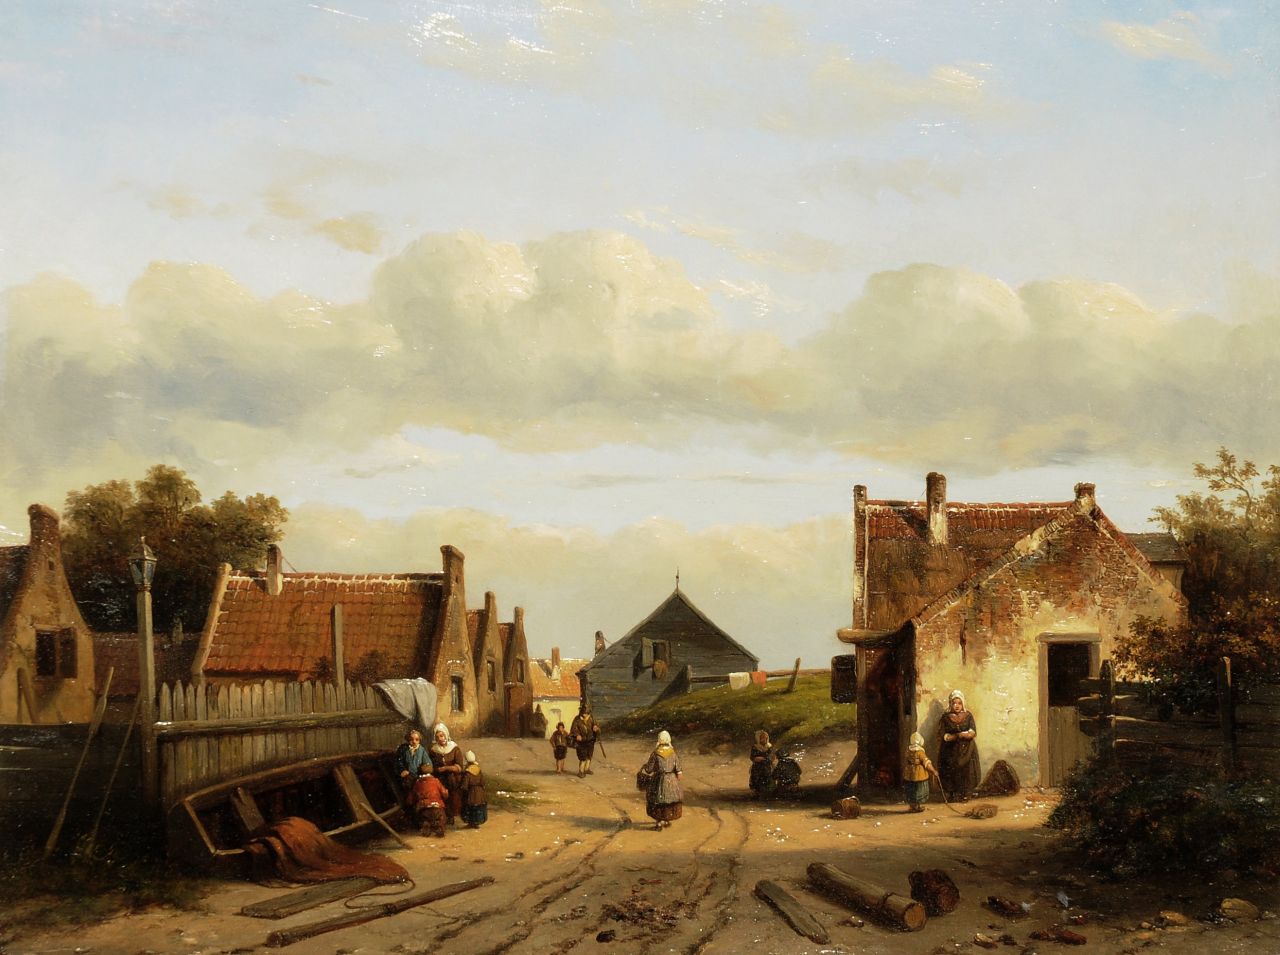 Leickert C.H.J.  | 'Charles' Henri Joseph Leickert | Paintings offered for sale | A Dutch village on the coast, oil on panel 30.2 x 39.8 cm,  dated 1851